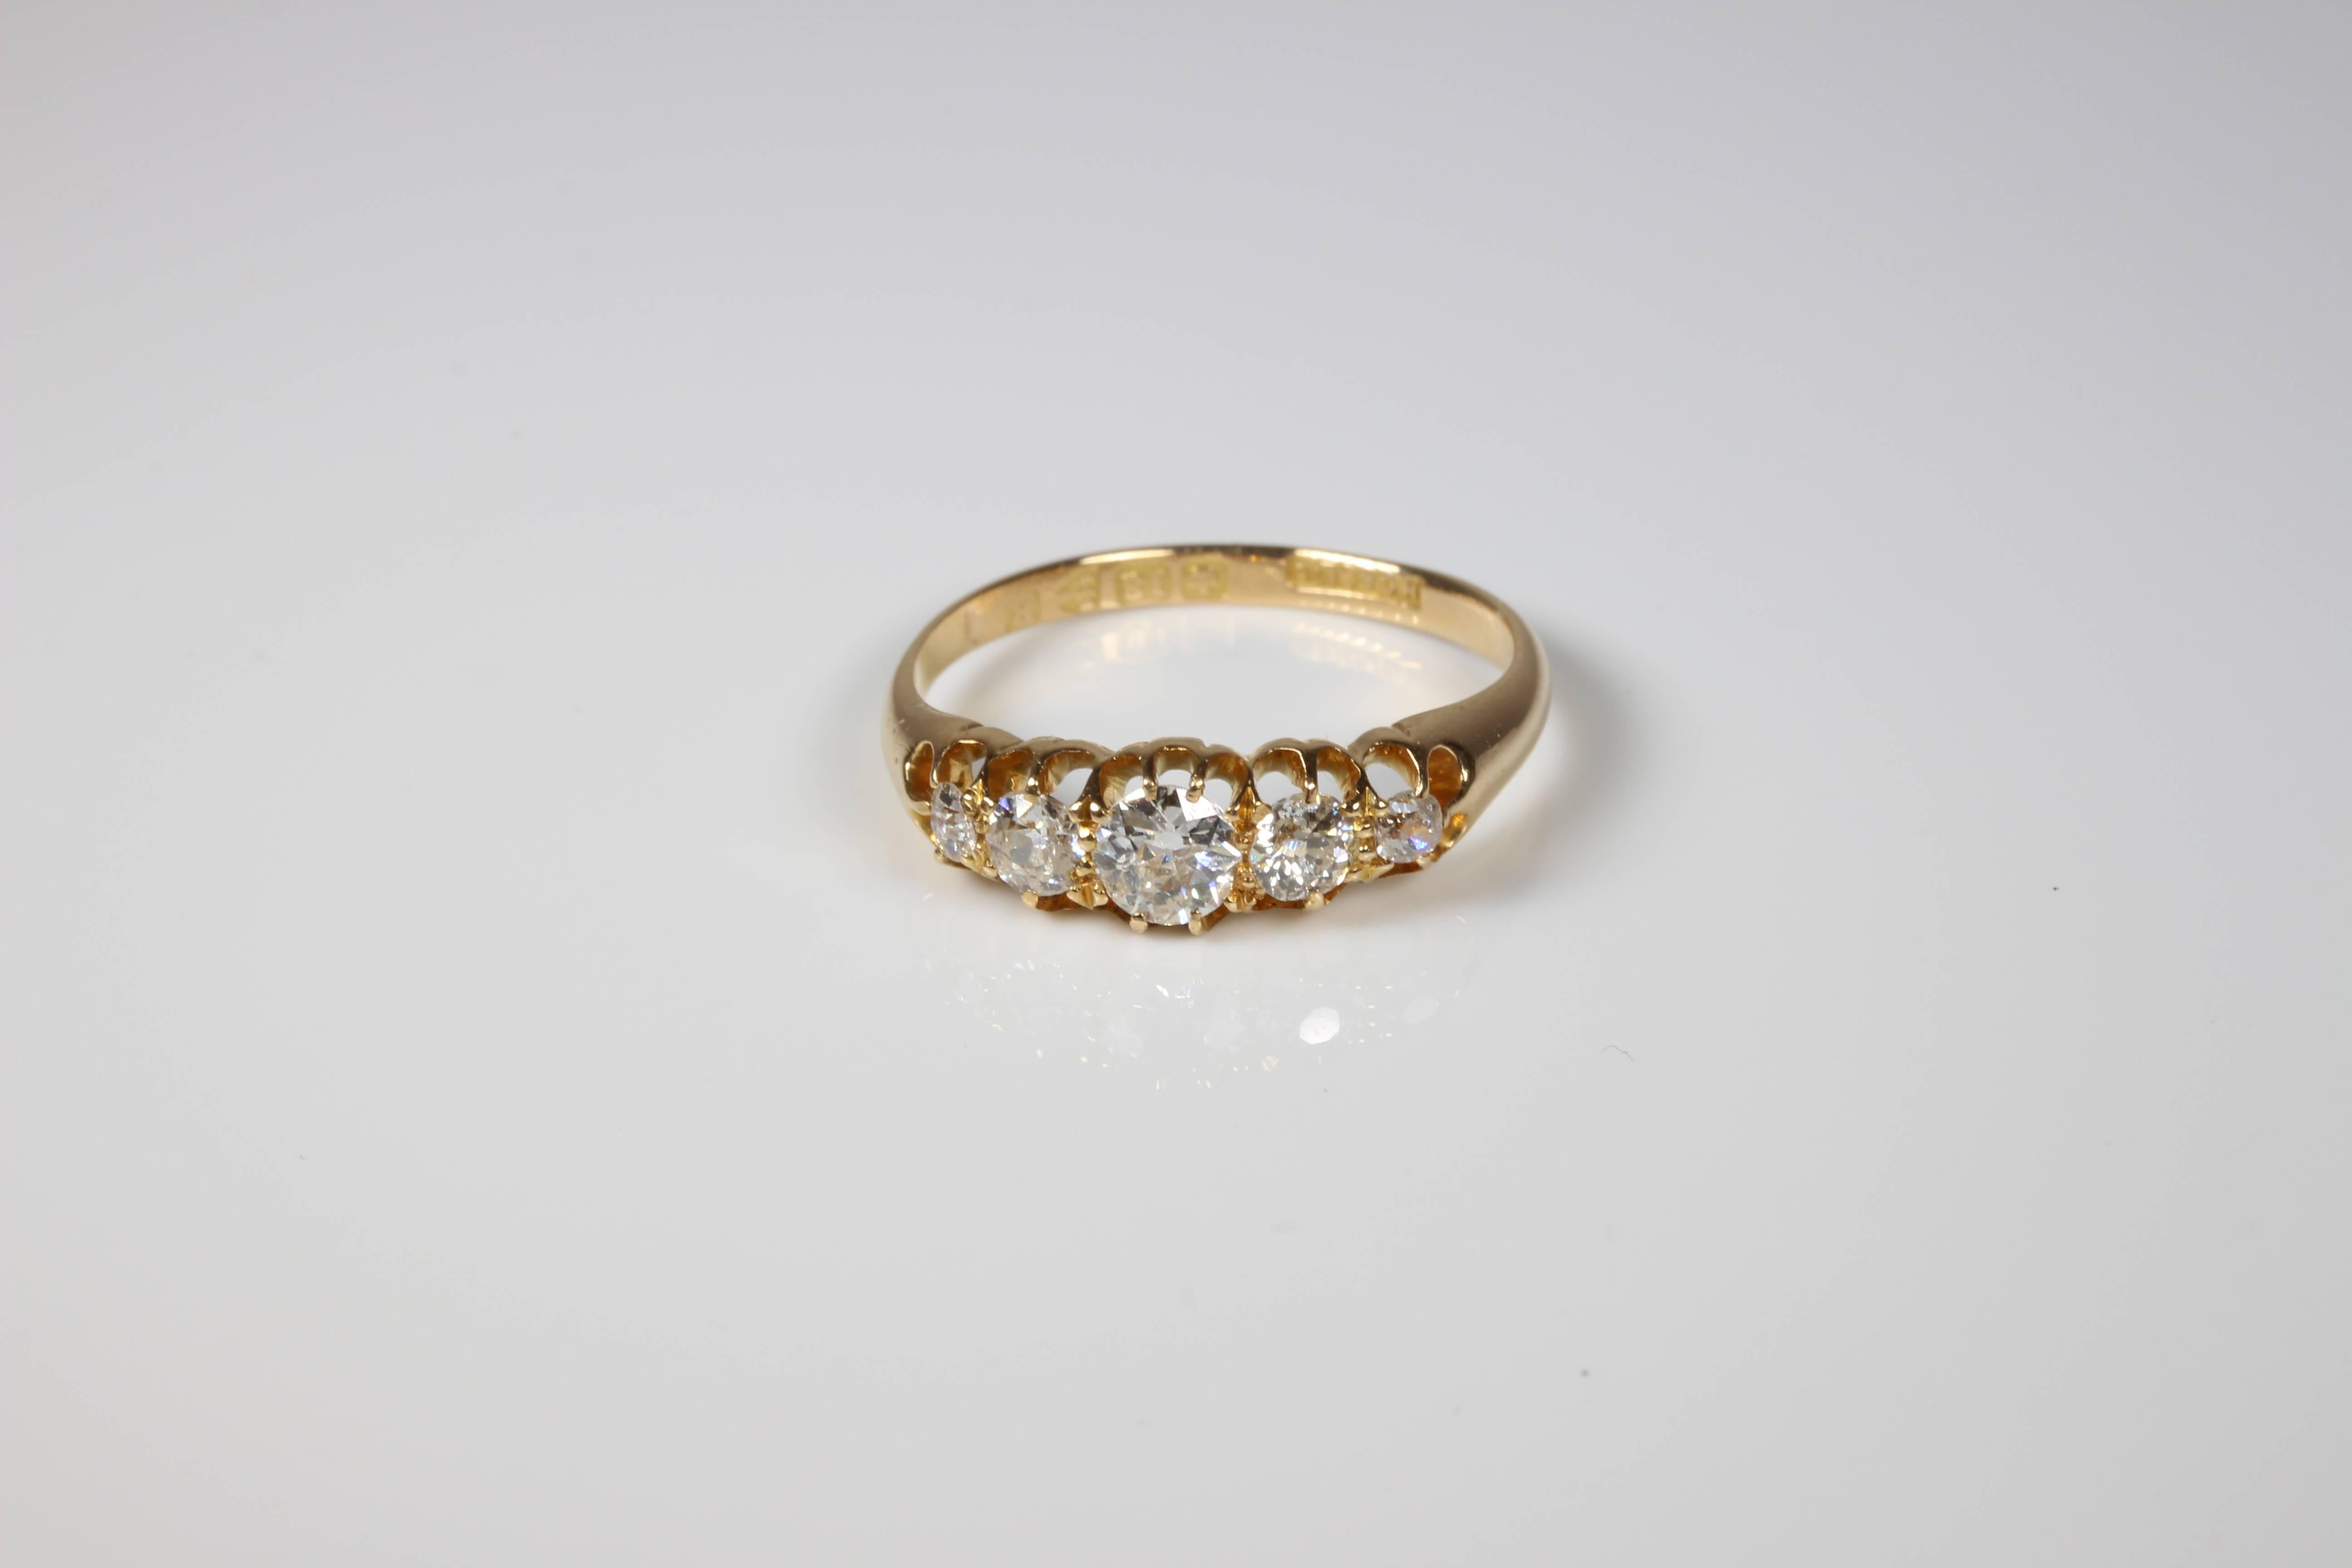 Antique 5 diamond ladies eternity ring. Set with 5 graduated old european cut diamonds of total approximate weight 0.59ct colour I with clarity SI-I1. Currently size M 1/2 (US=6 1/2) and will be safely sized by our expert jewellers free of charge if